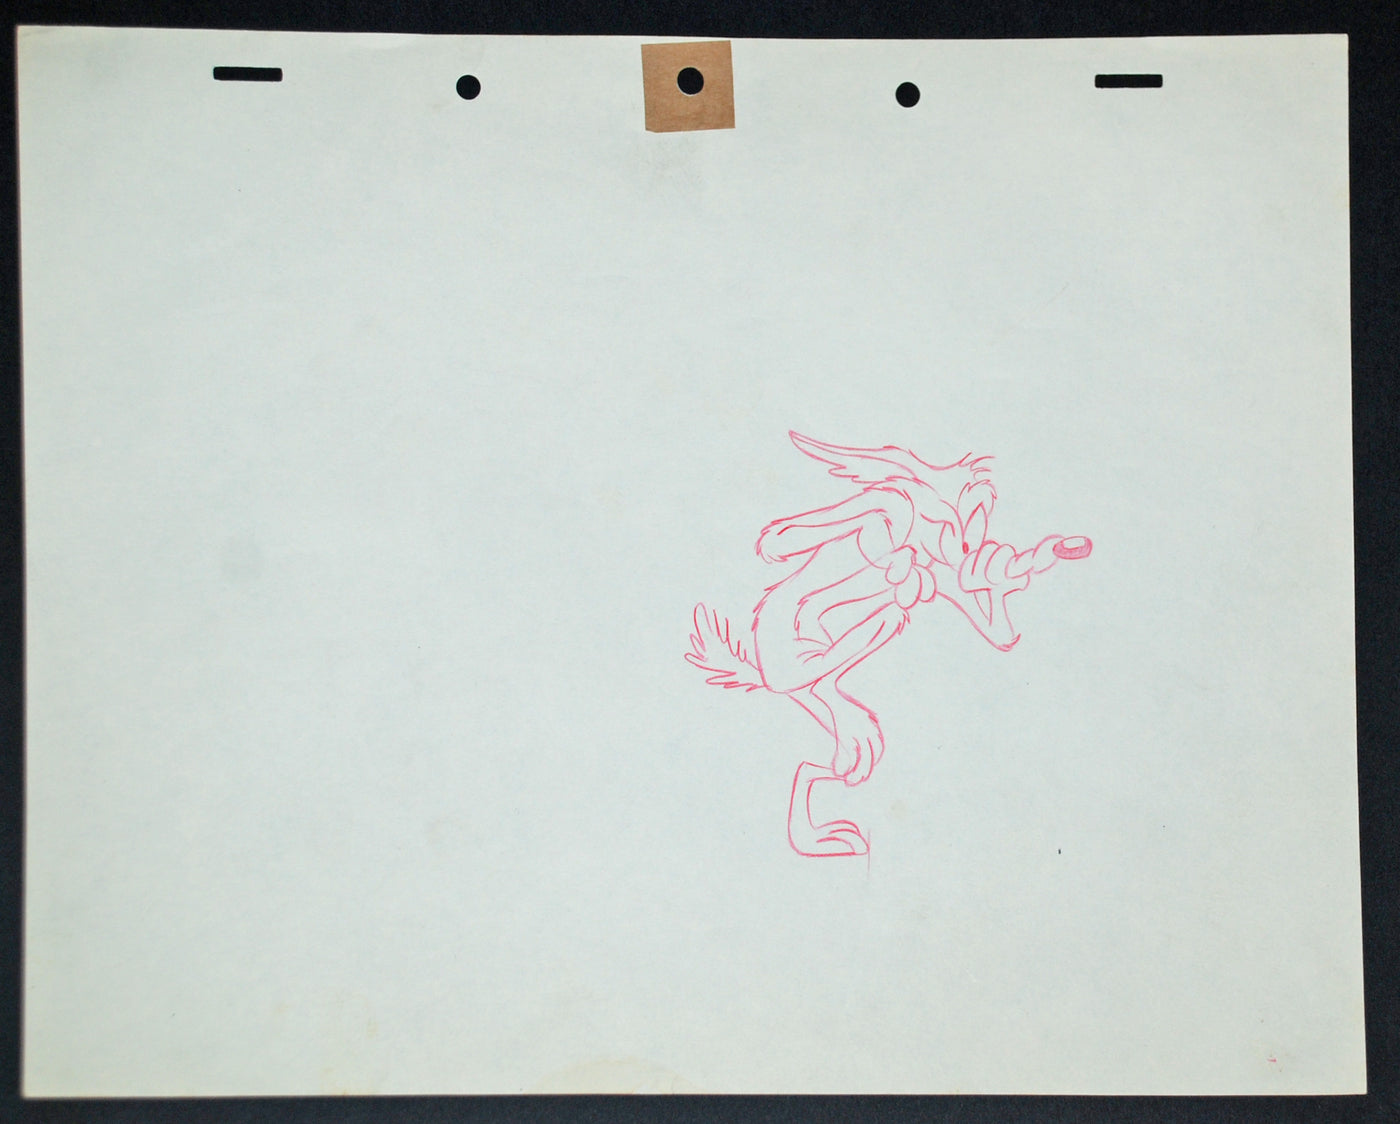 Original Warner Brothers Production Drawing Featuring Wile E. Coyote